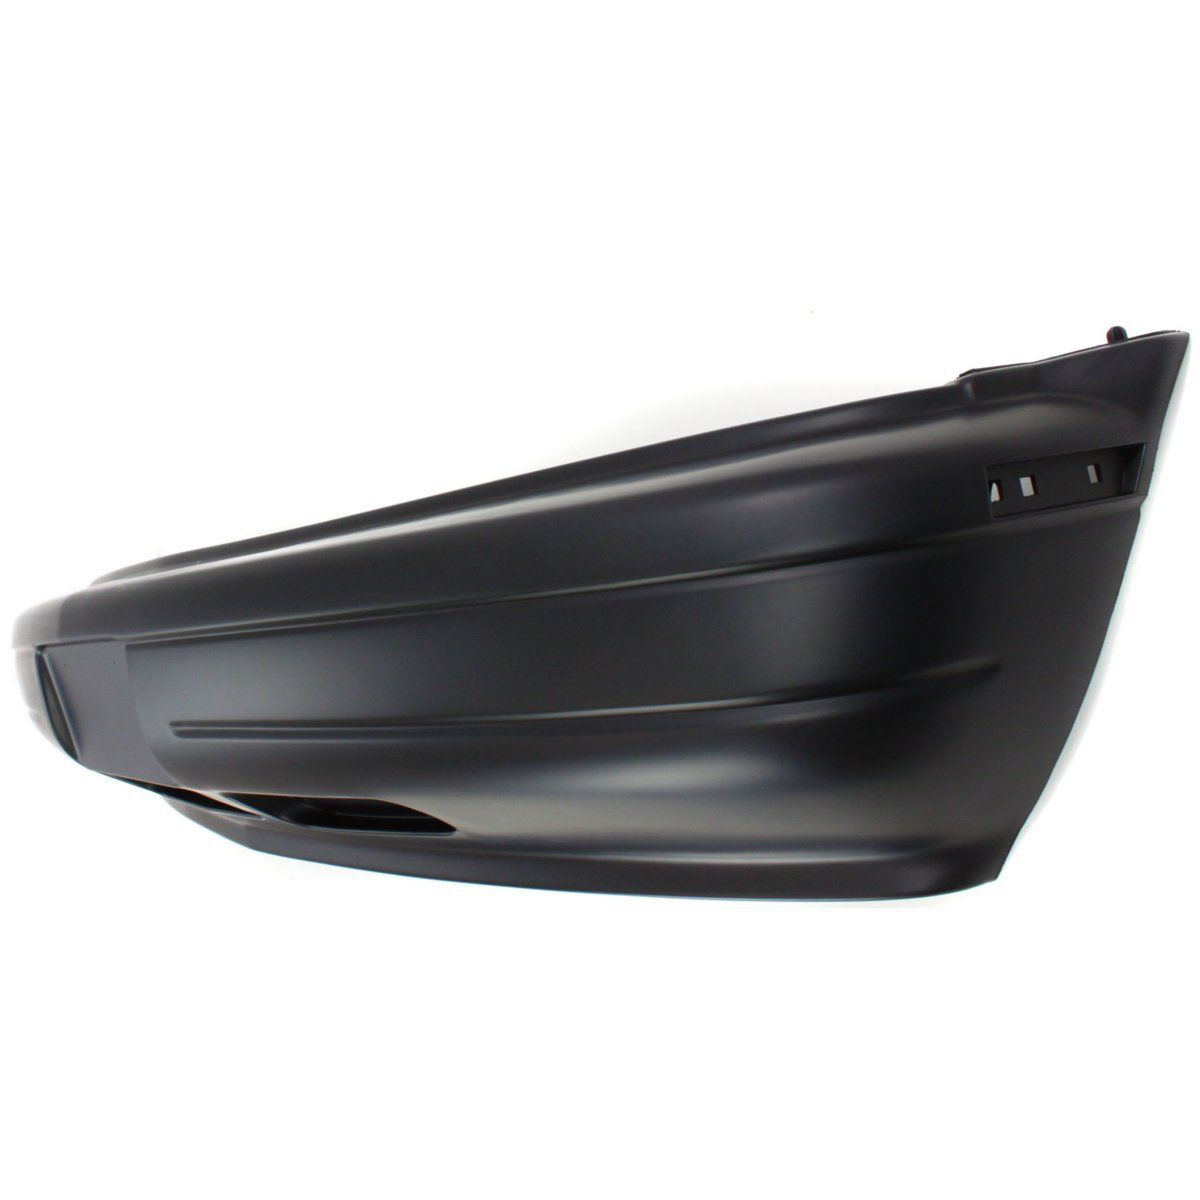 1995-2005 CHEVY ASTRO Front Bumper Cover CL/LT models  smooth surface Painted to Match